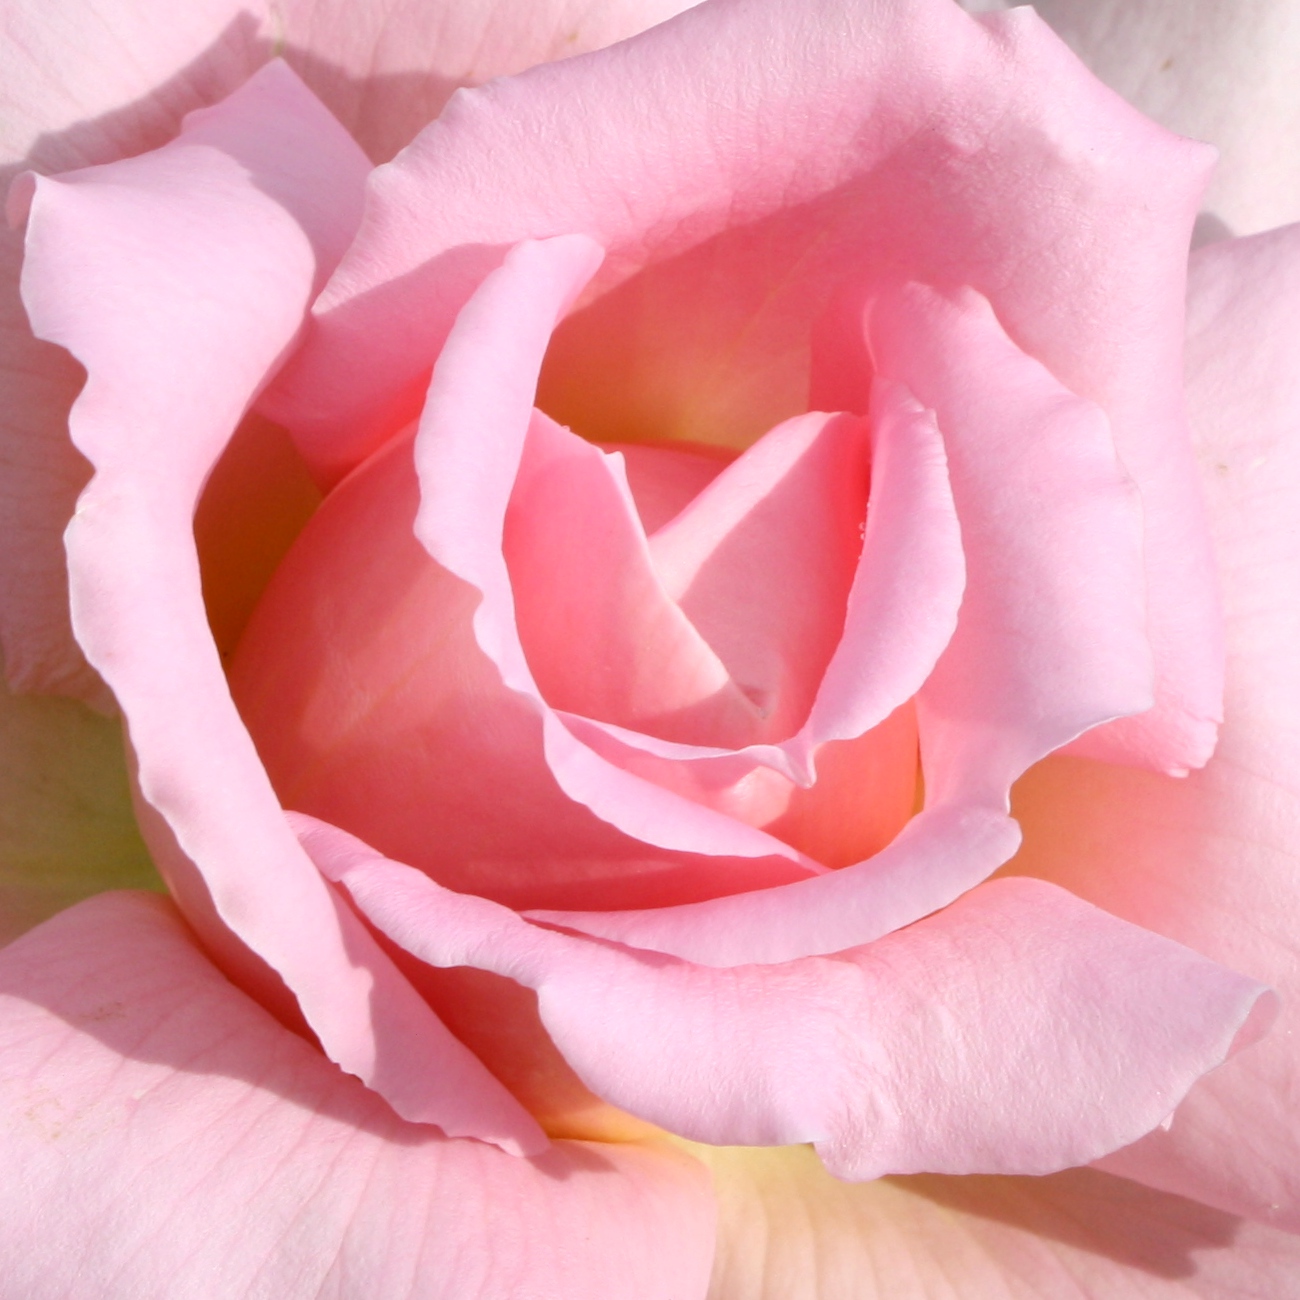 pink rose close up free photo dimensions 1300 1300